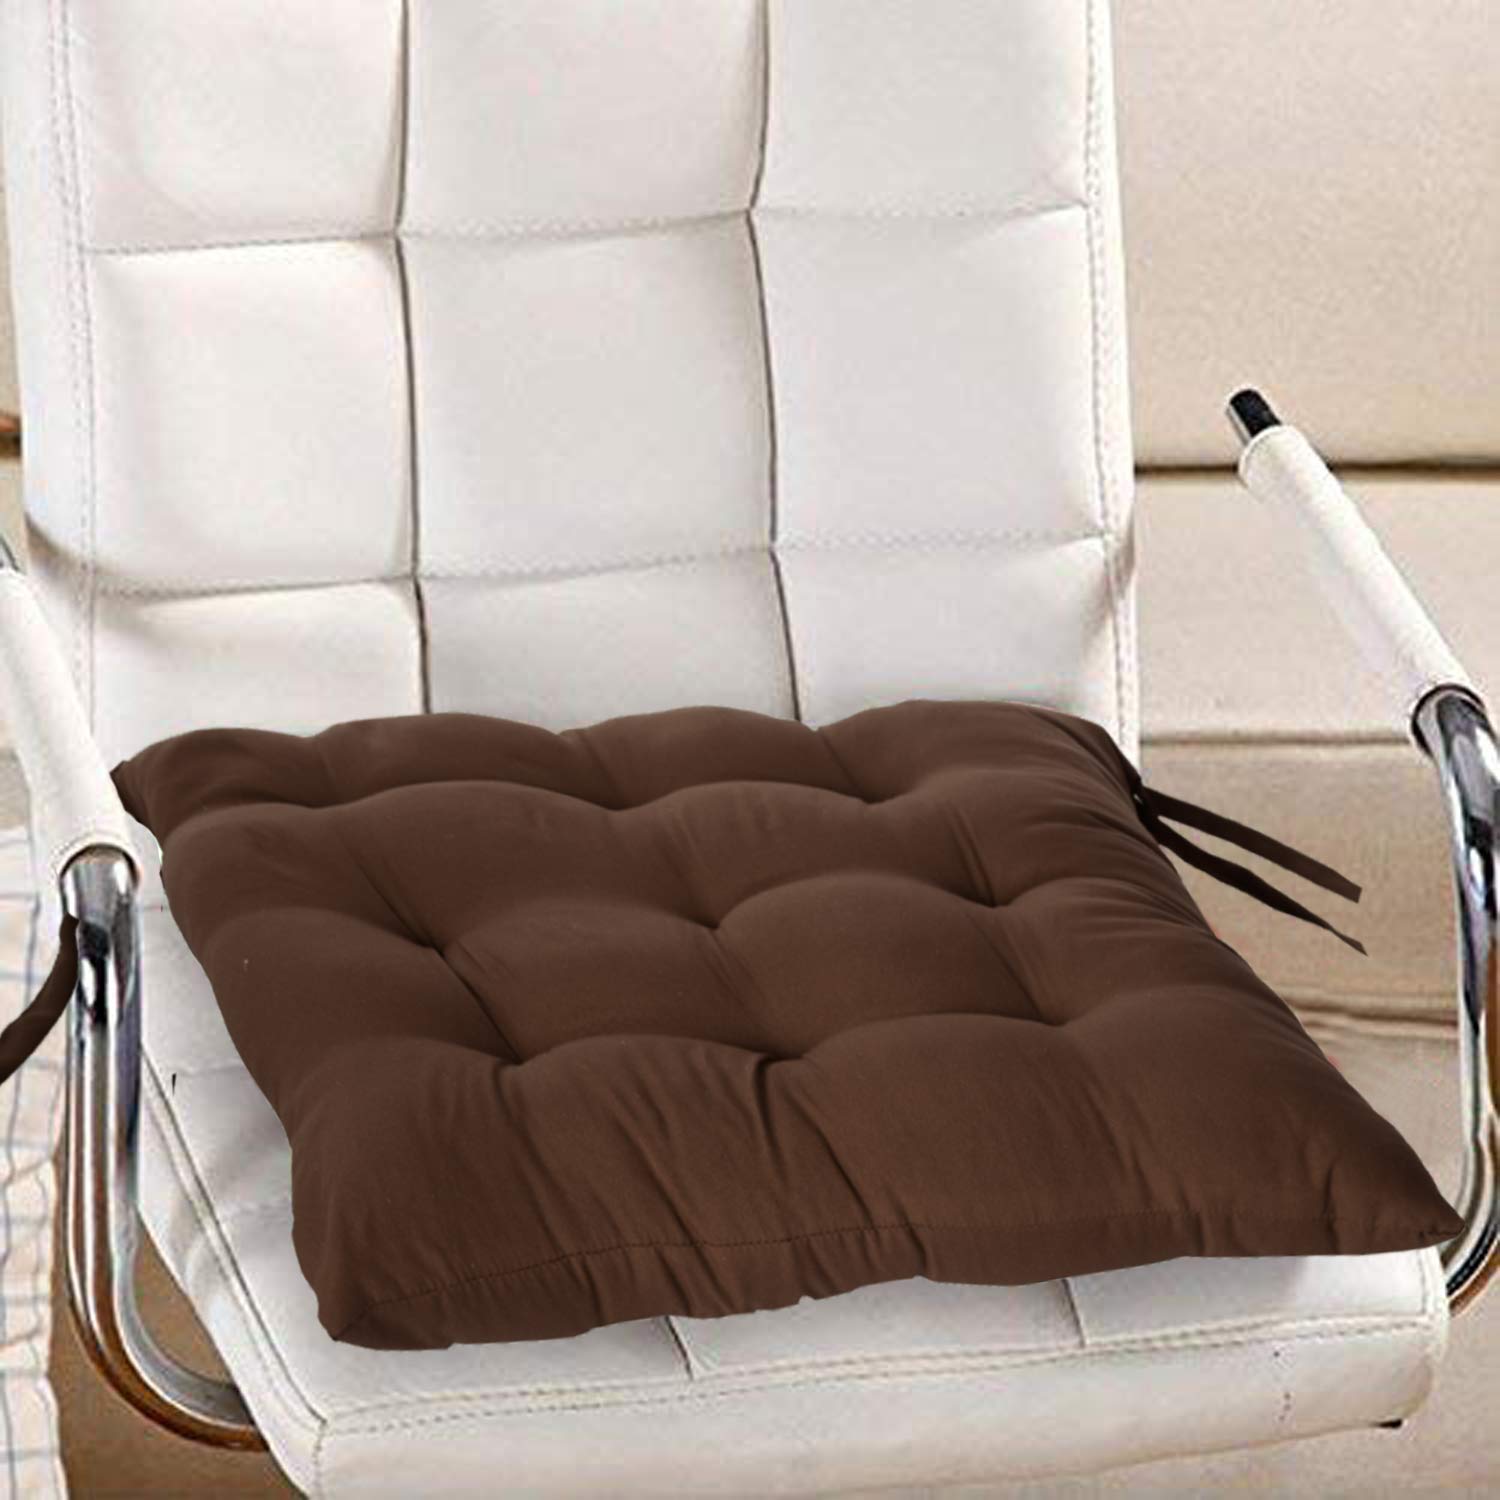 Kuber Industries Microfiber Square Chair Pad/Cushion for Office|Home or Car Sitting with Ties (Brown)